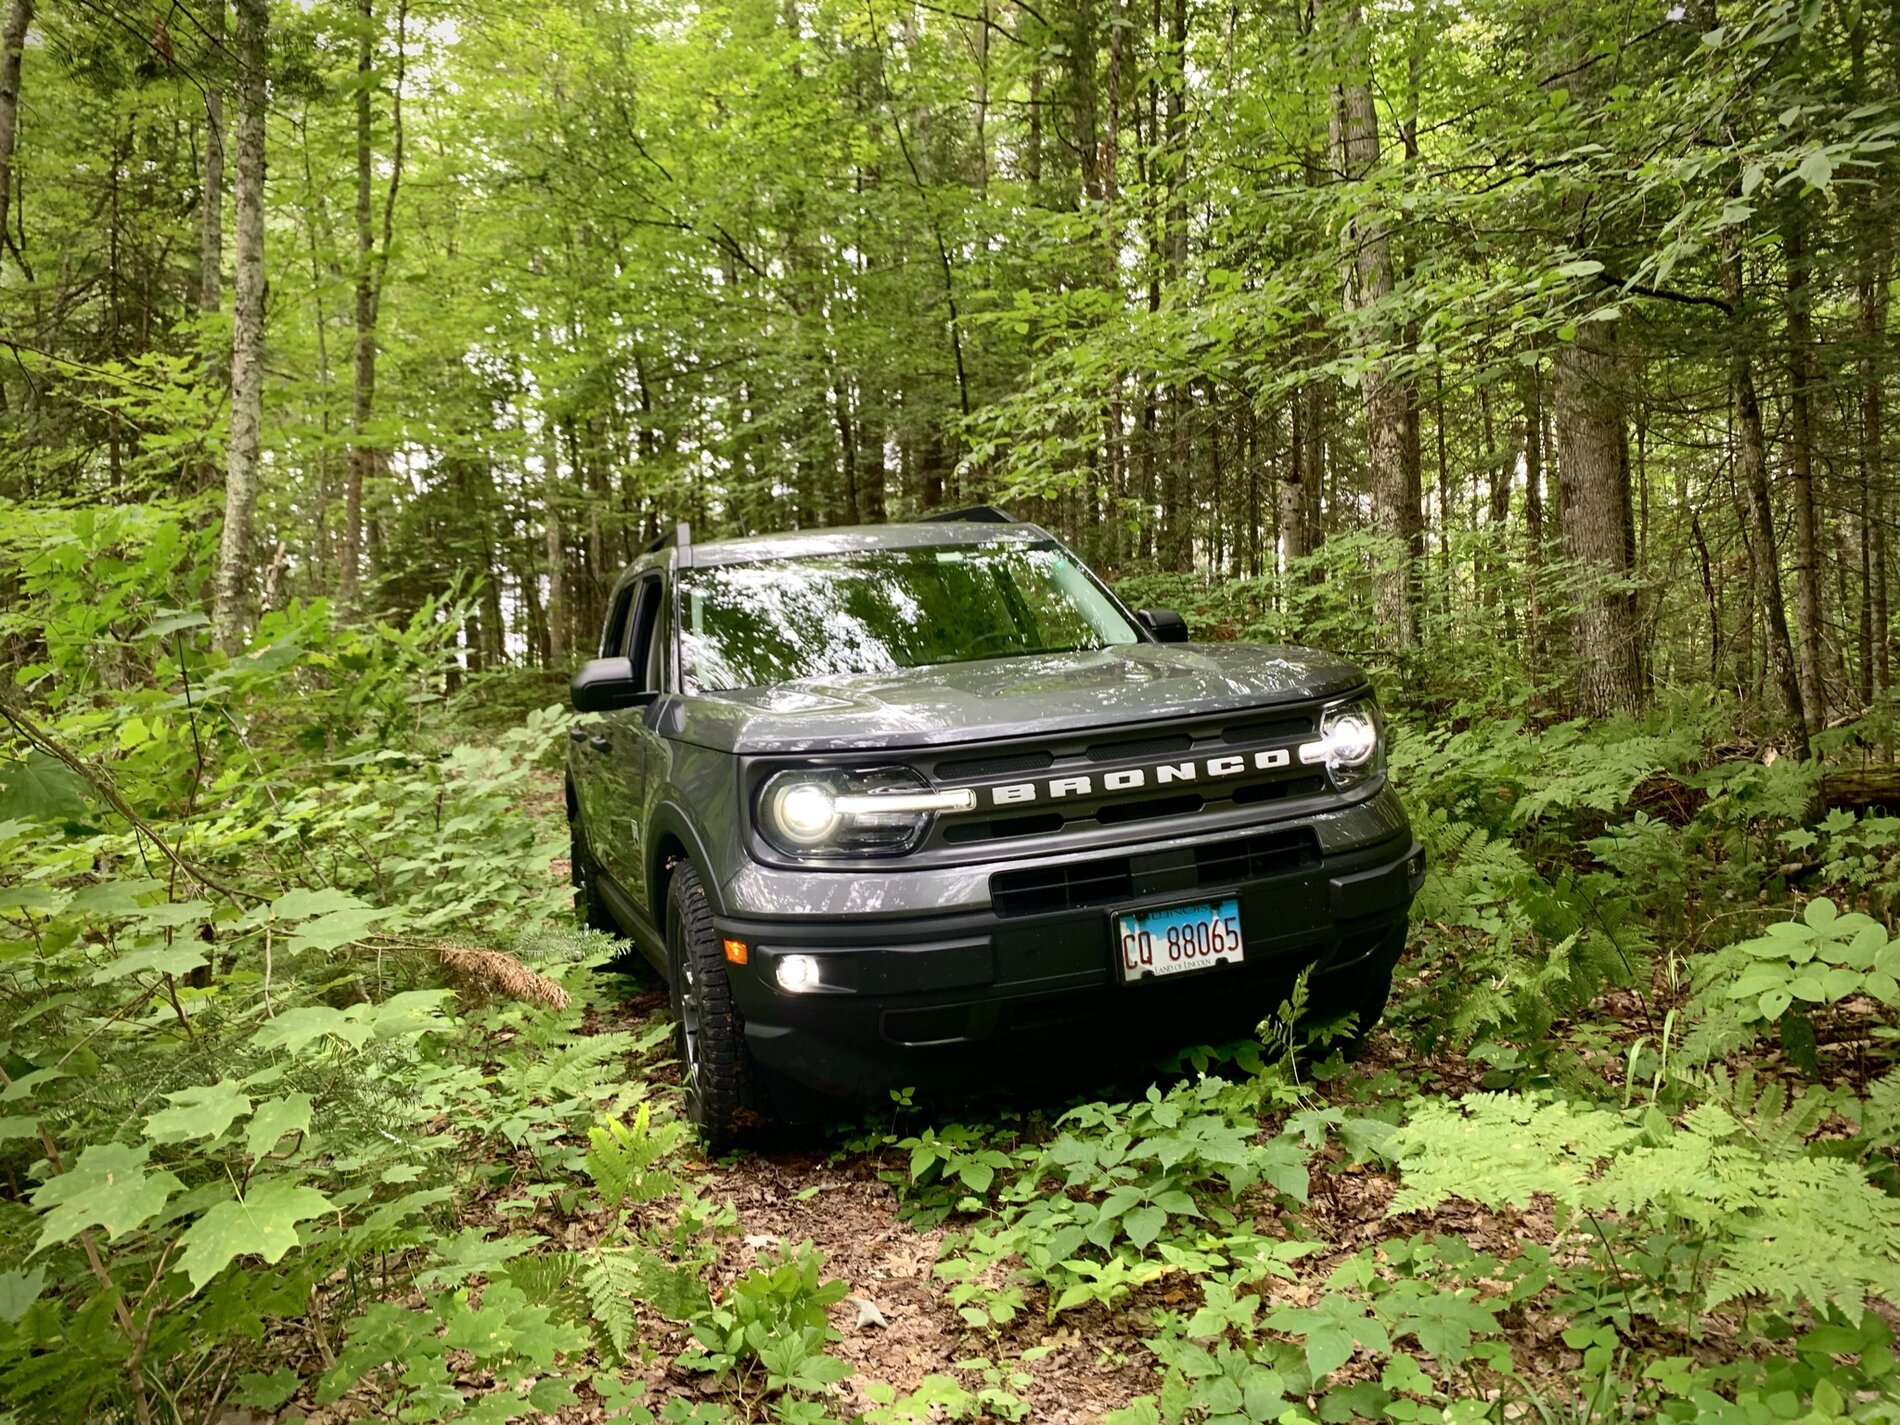 Ford Bronco Sport Trail Driving Northern Wisconsin in a Bronco Sport Big Bend - Pics, Video, and Build 8166F653-7588-462E-9750-A1569CFD4845